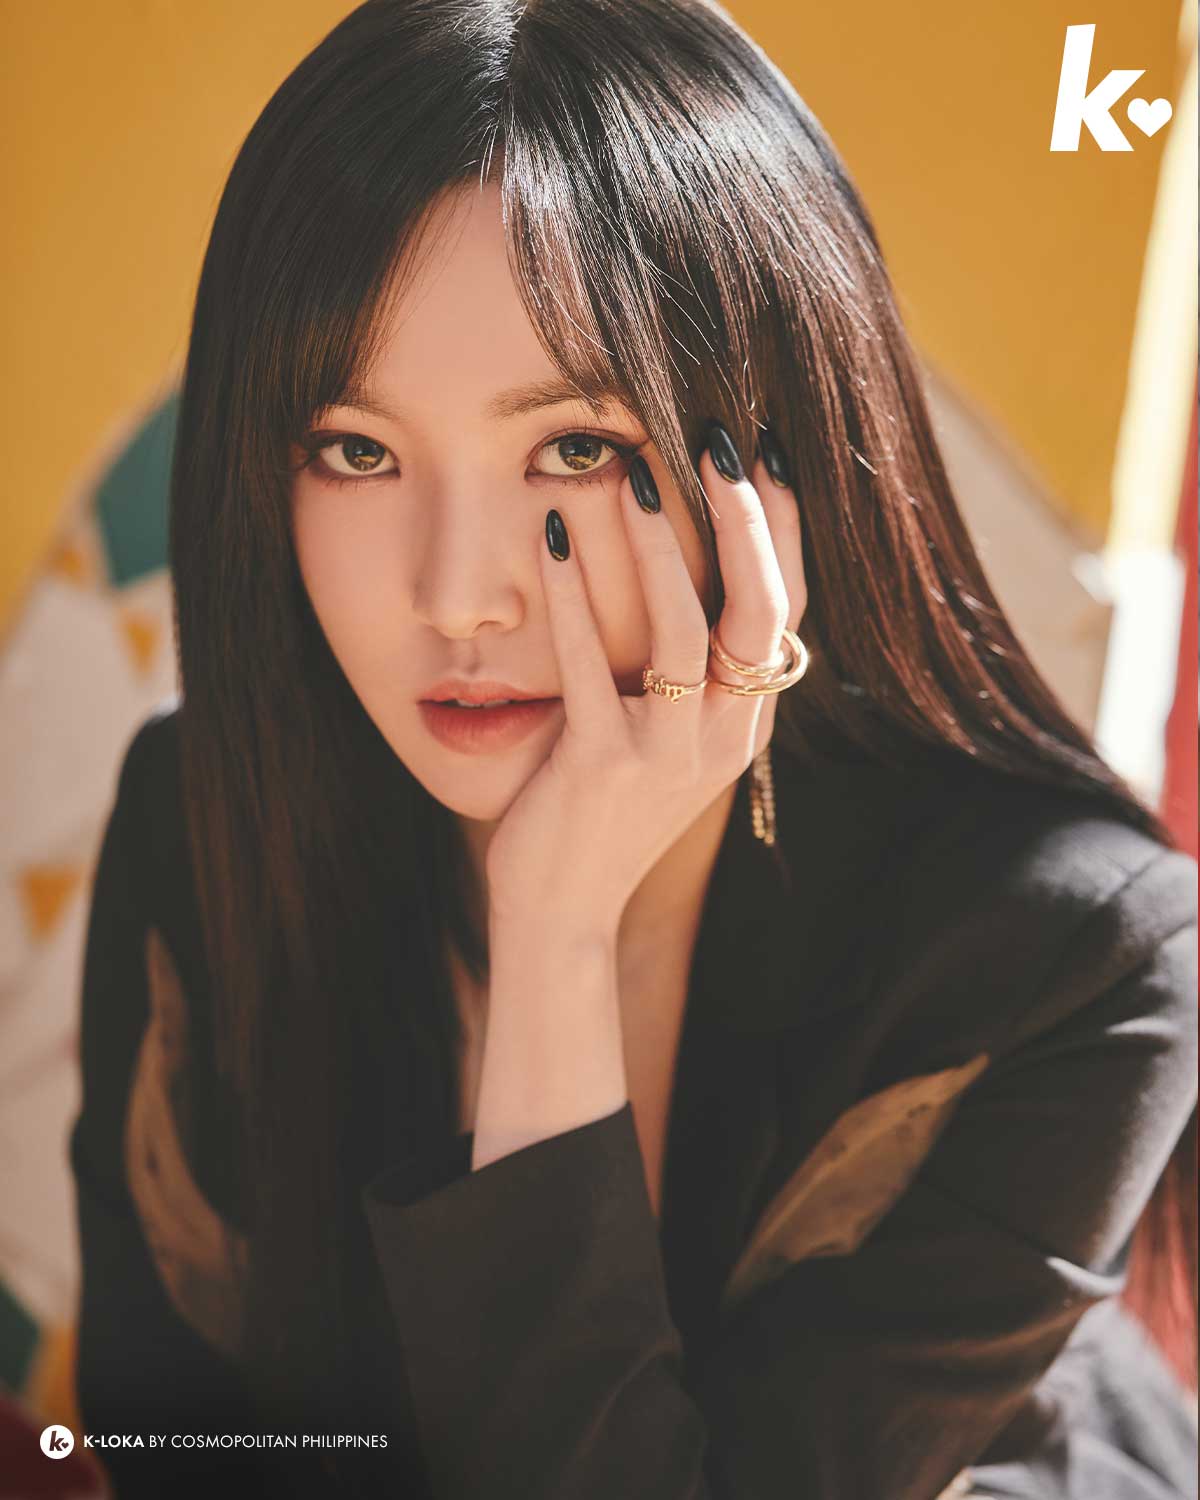 K-loka Exclusive: Yuju Talks About Her New Chapter As A Solo Artist